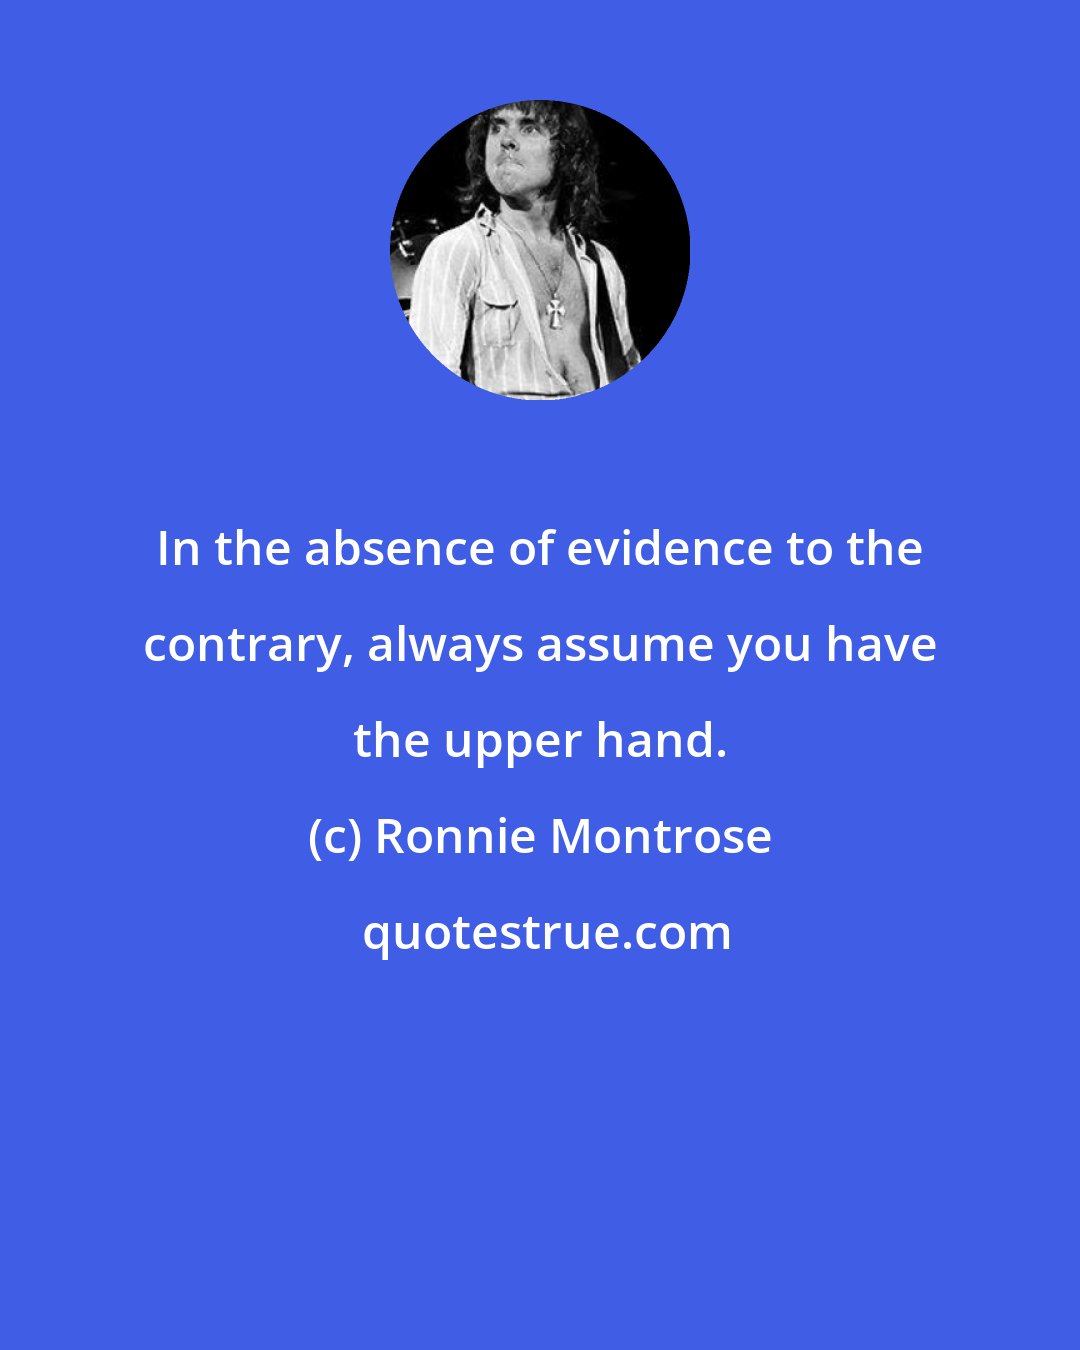 Ronnie Montrose: In the absence of evidence to the contrary, always assume you have the upper hand.